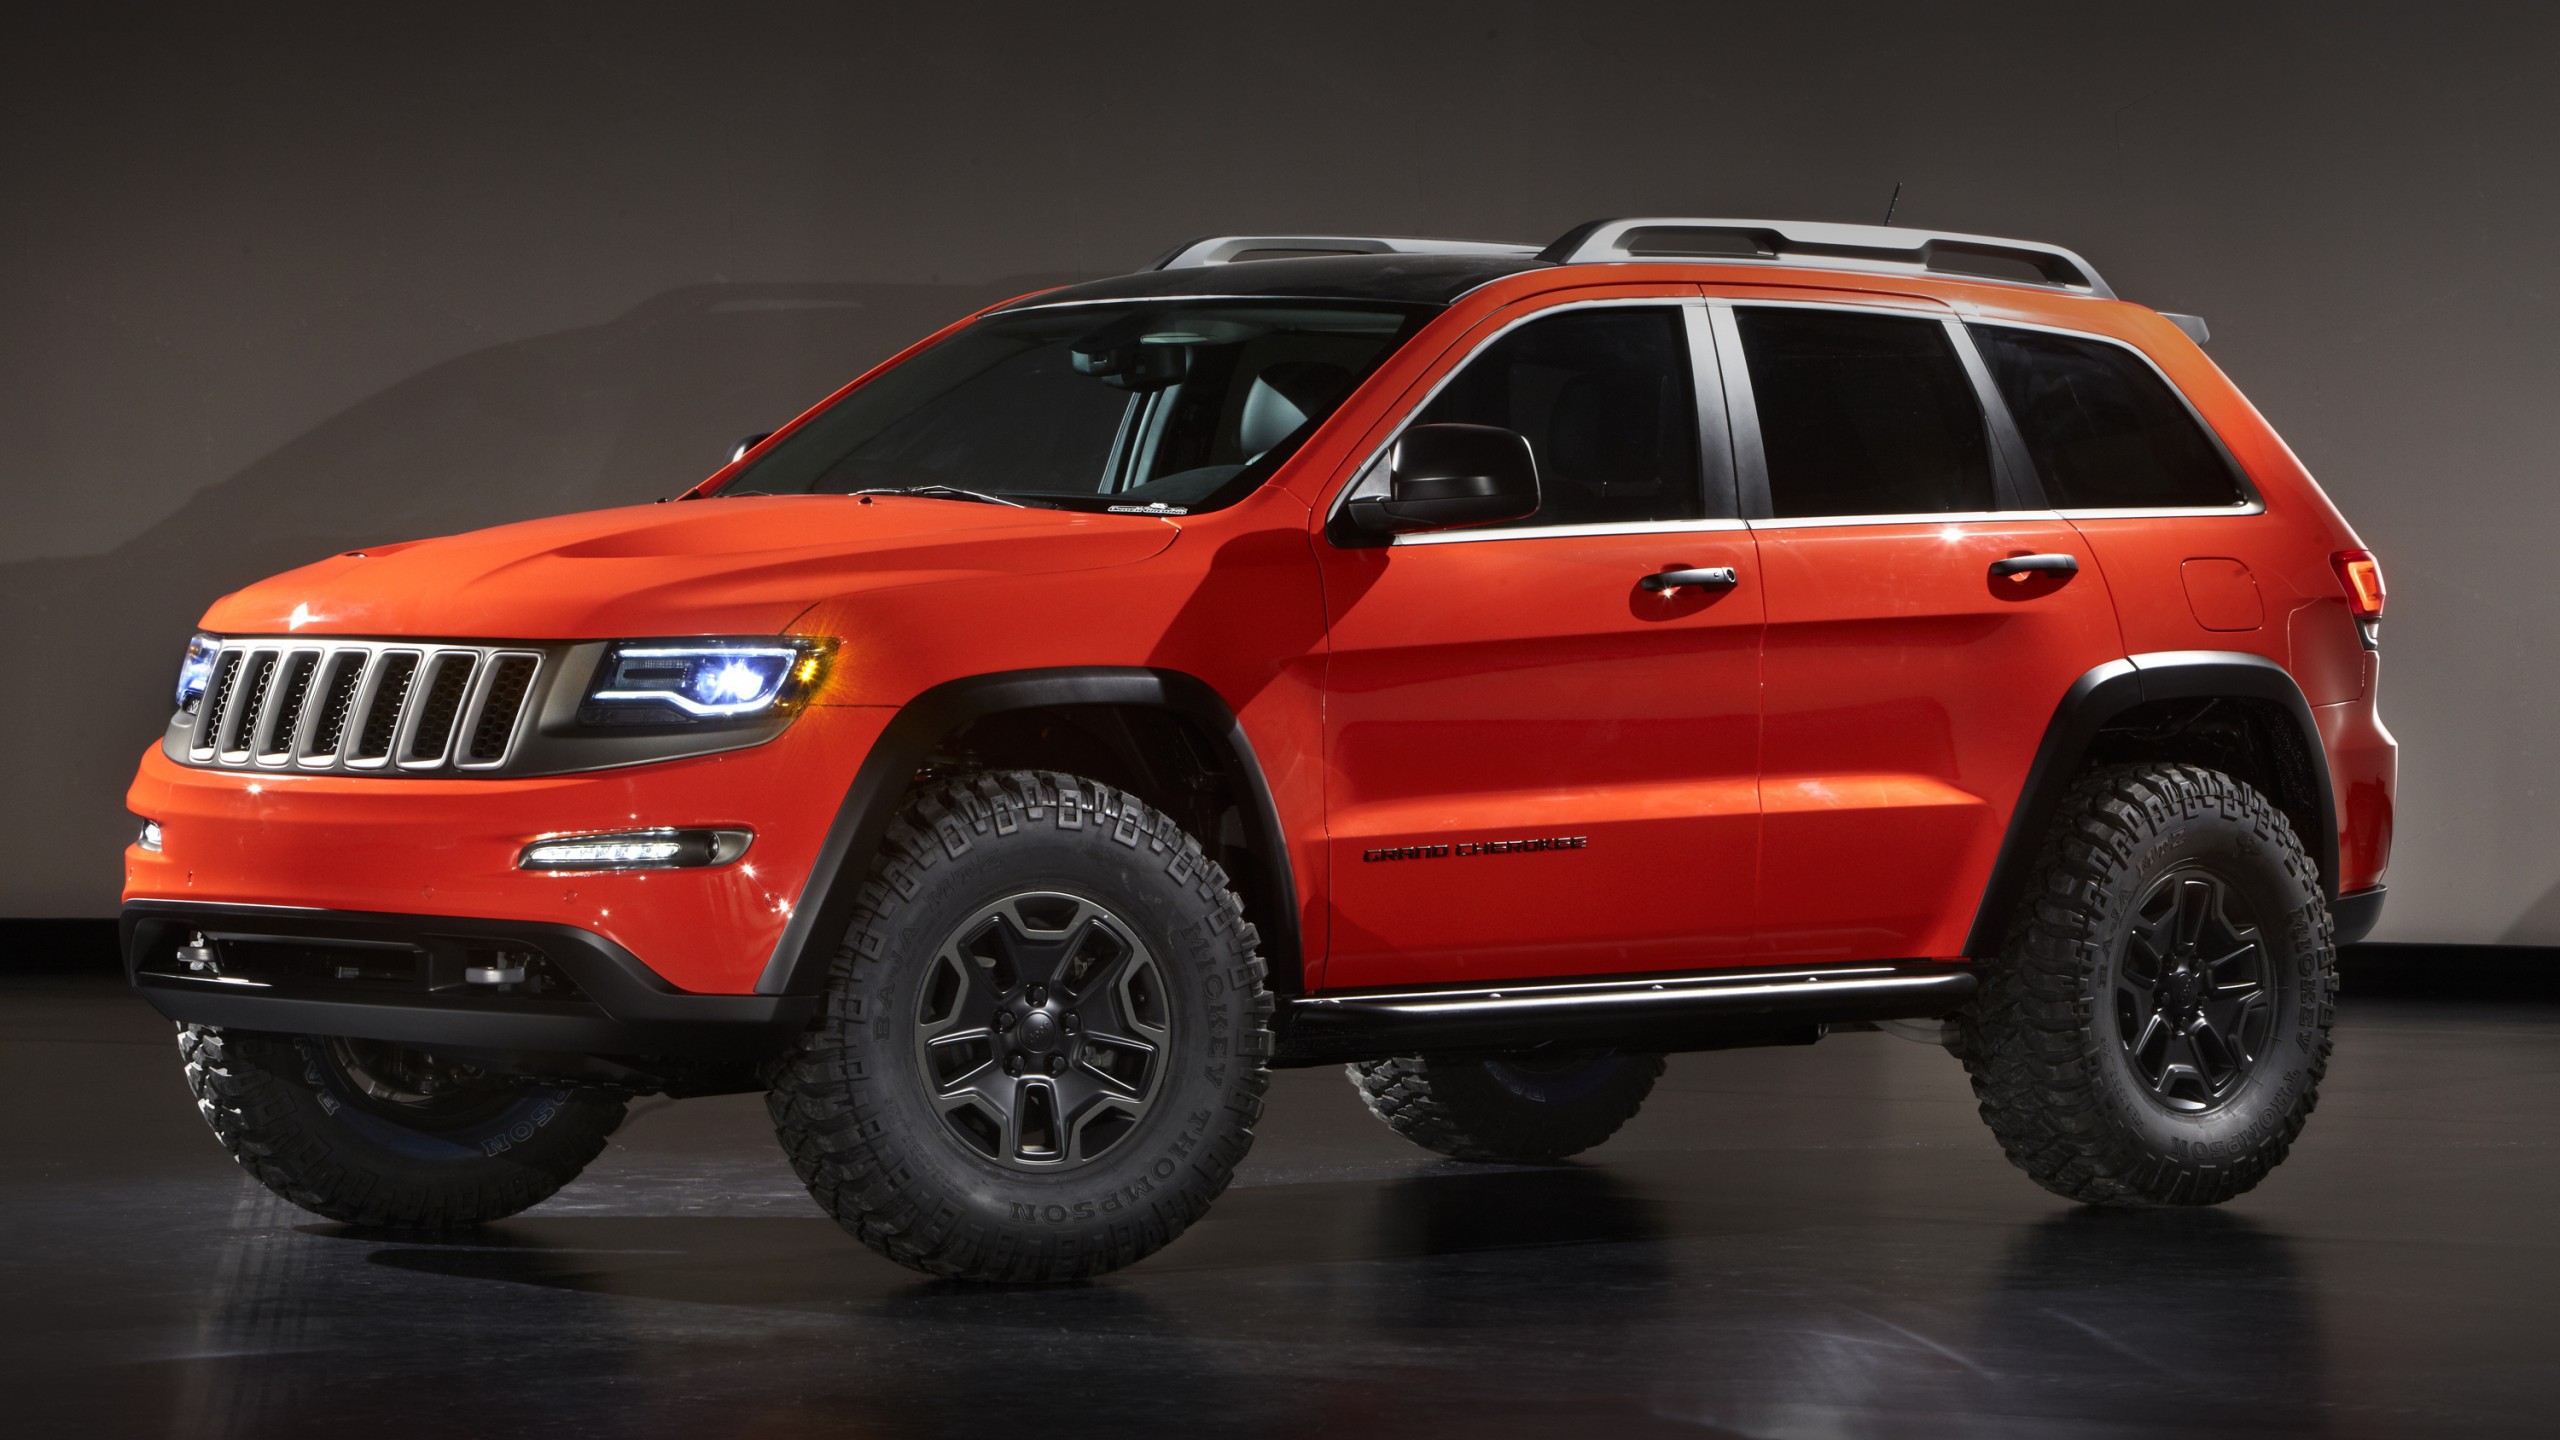 Jeep Grand Cherokee Wallpapers Images Photos Pictures Backgrounds 2005 Jeep Grand Cherokee 3.7 Towing Capacity